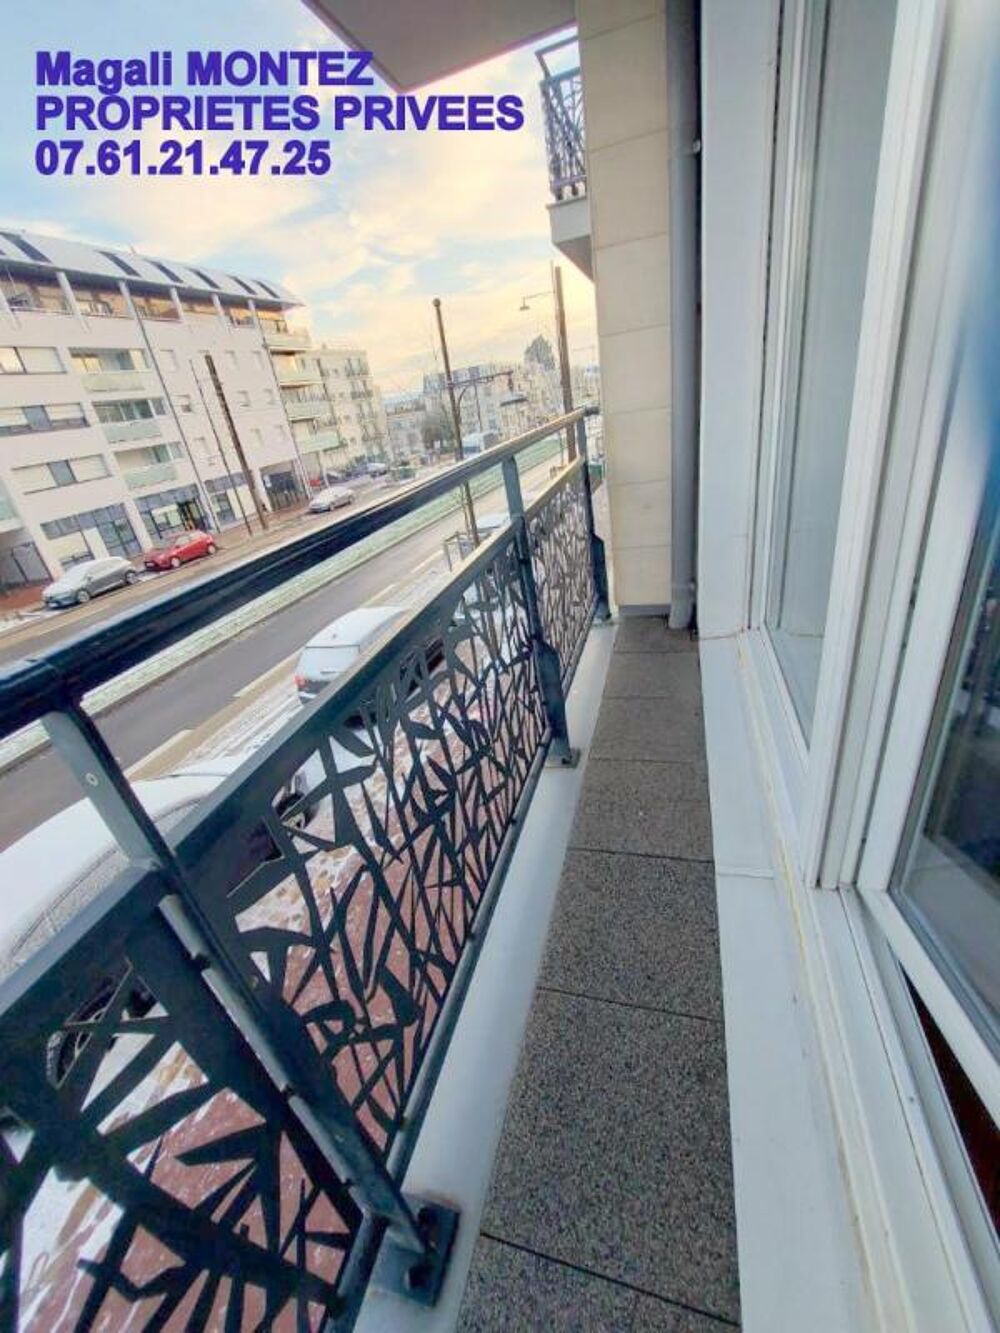 Vente Appartement F2 NORMES PMR AVEC BALCON ET PARKING - CHATENAY MALABRY 92290 Chatenay malabry